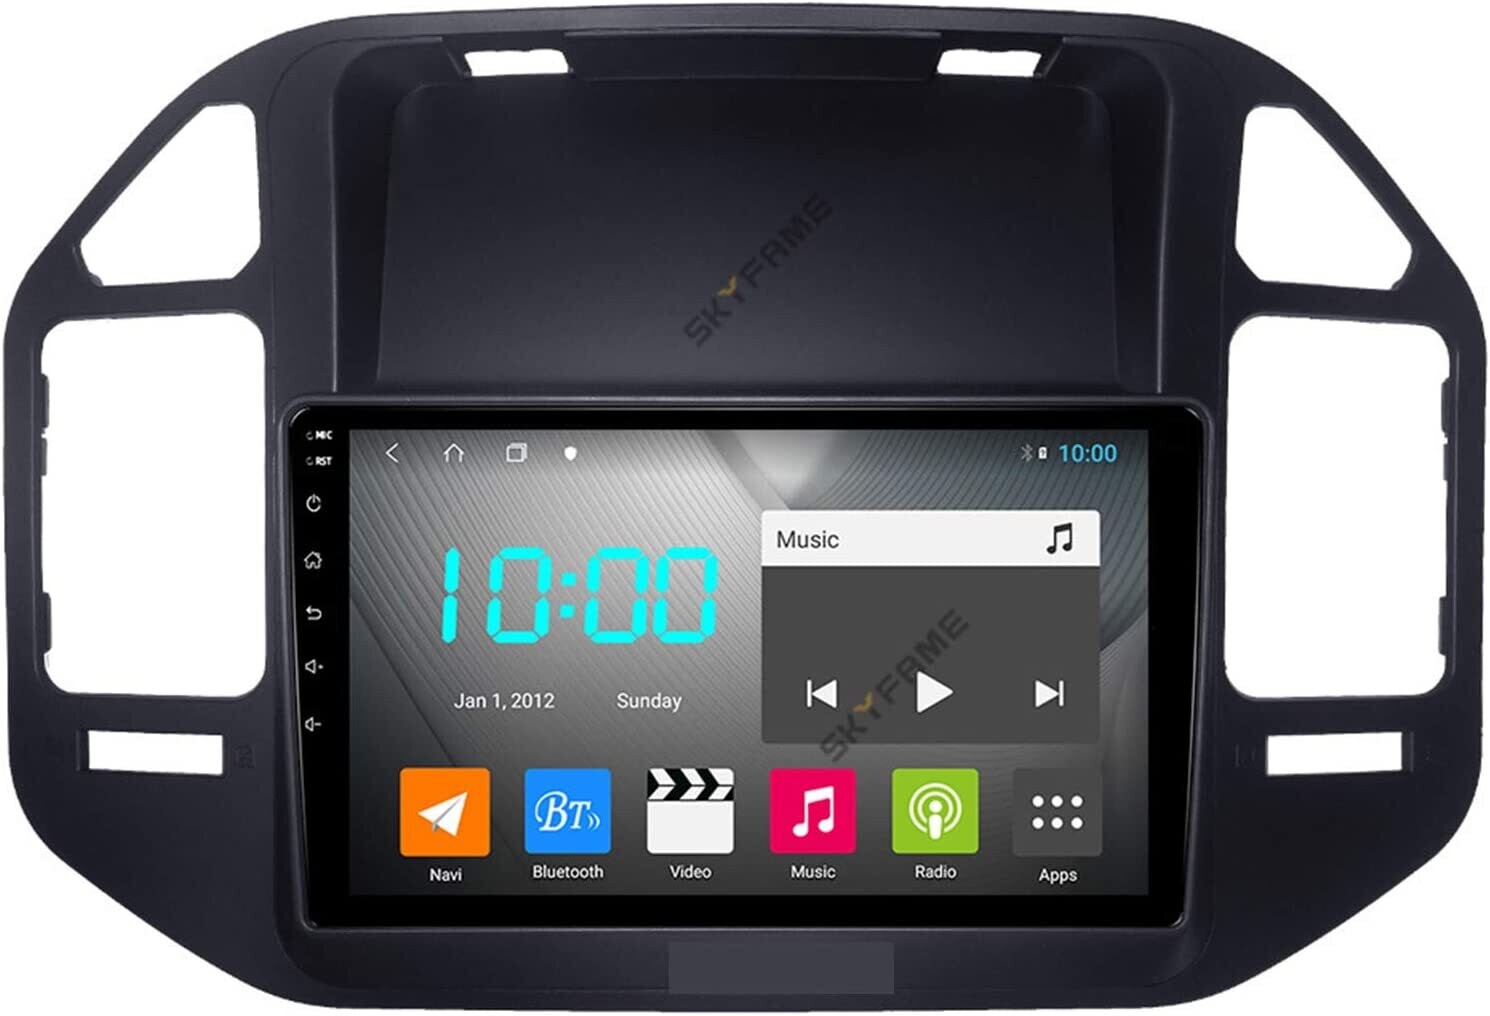 Mitsubishi Pajero V73 Android touch screen smart custom car stereo radio 9 inch, with bluetooth, GPS, Android auto and Apple Carplay 2gb 32gb. 2004,2005,2006, 2007, 2008, 2009,2010, 2011